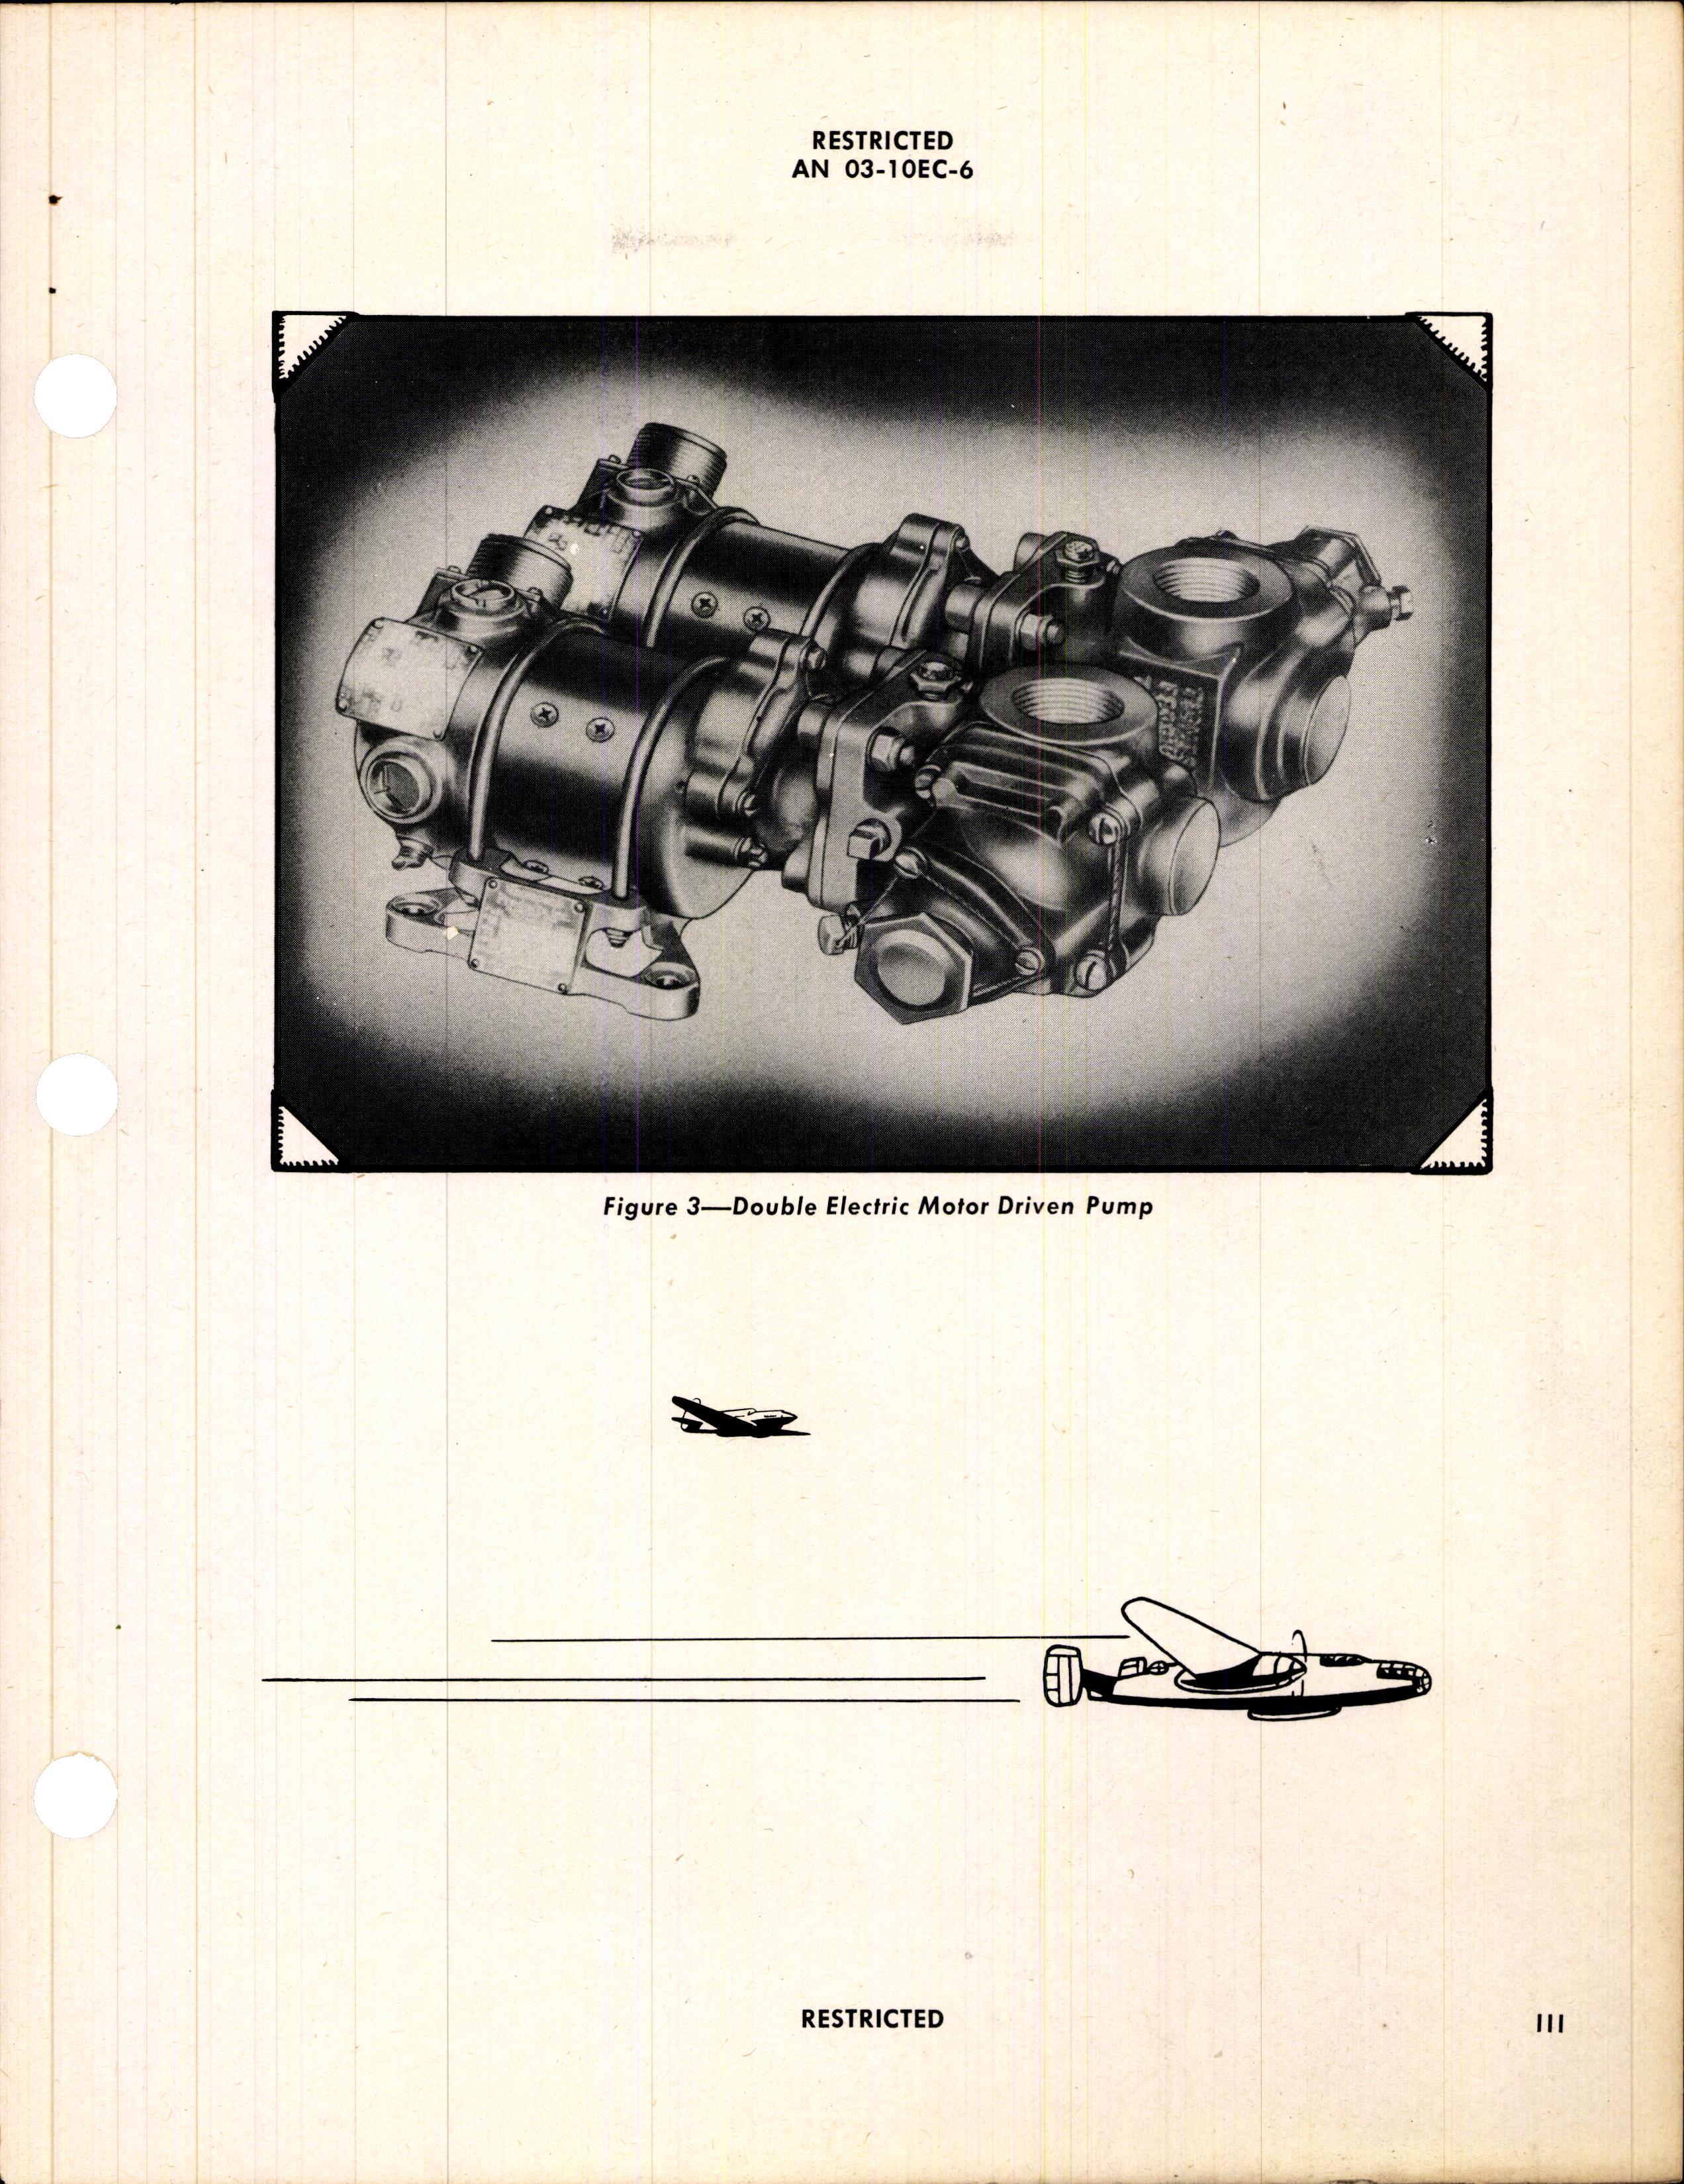 Sample page 5 from AirCorps Library document: Handbook of Instructions with Parts Catalog for Thompson Electric Motor-Driven Fuel Pumps